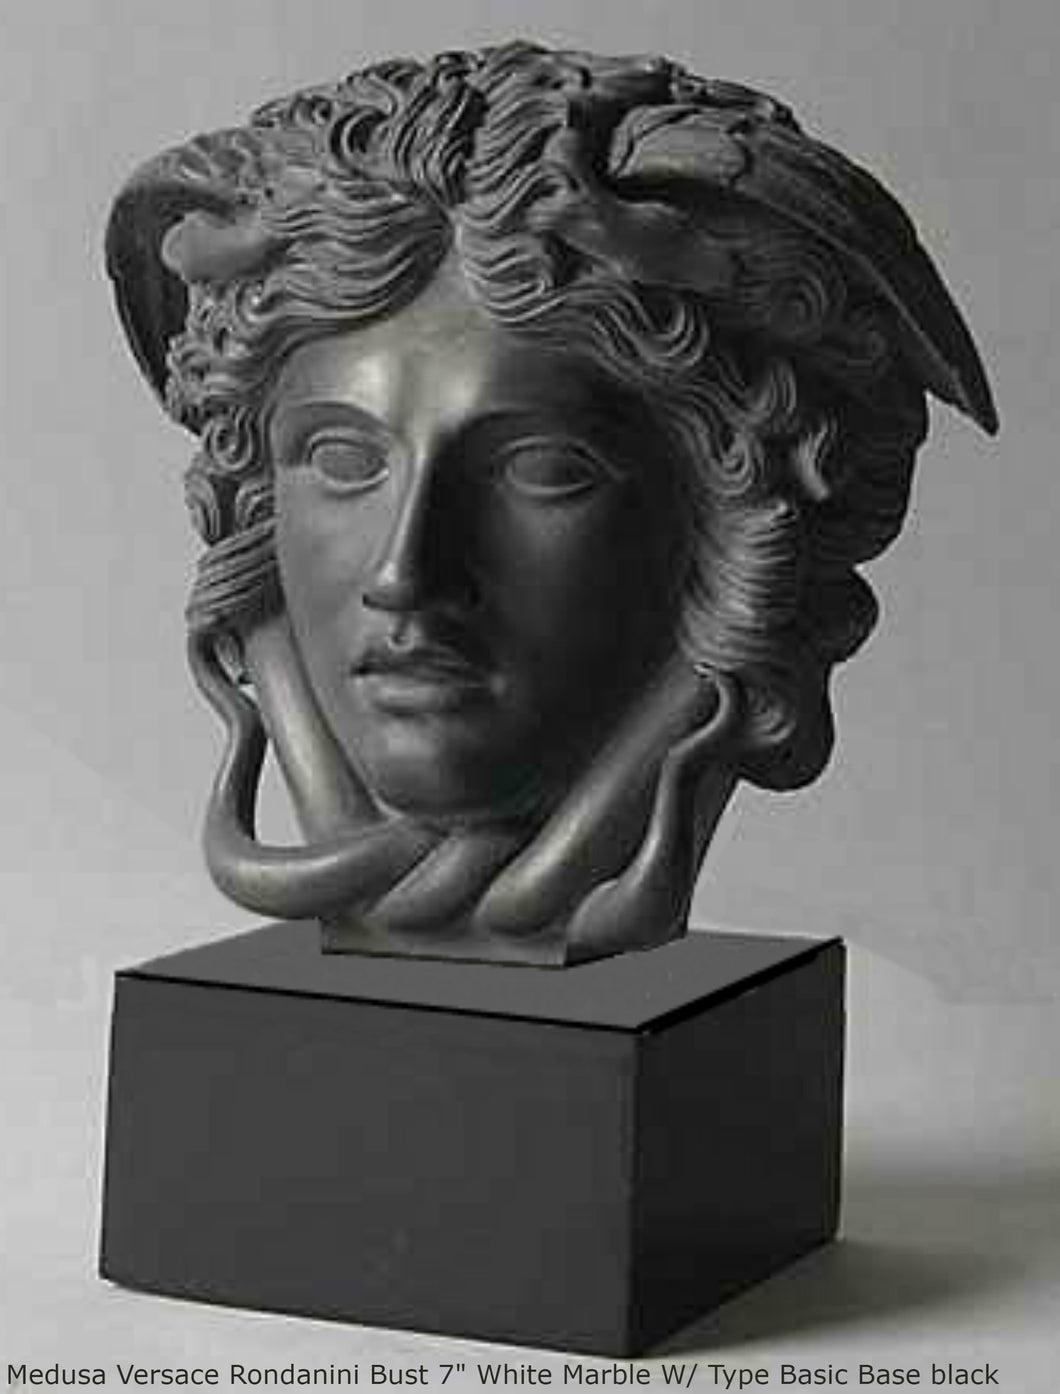 History Medusa Versace Rondanini Bust design Artifact Carved Sculpture Statue 7" www.Neo-Mfg.com Mounted on base